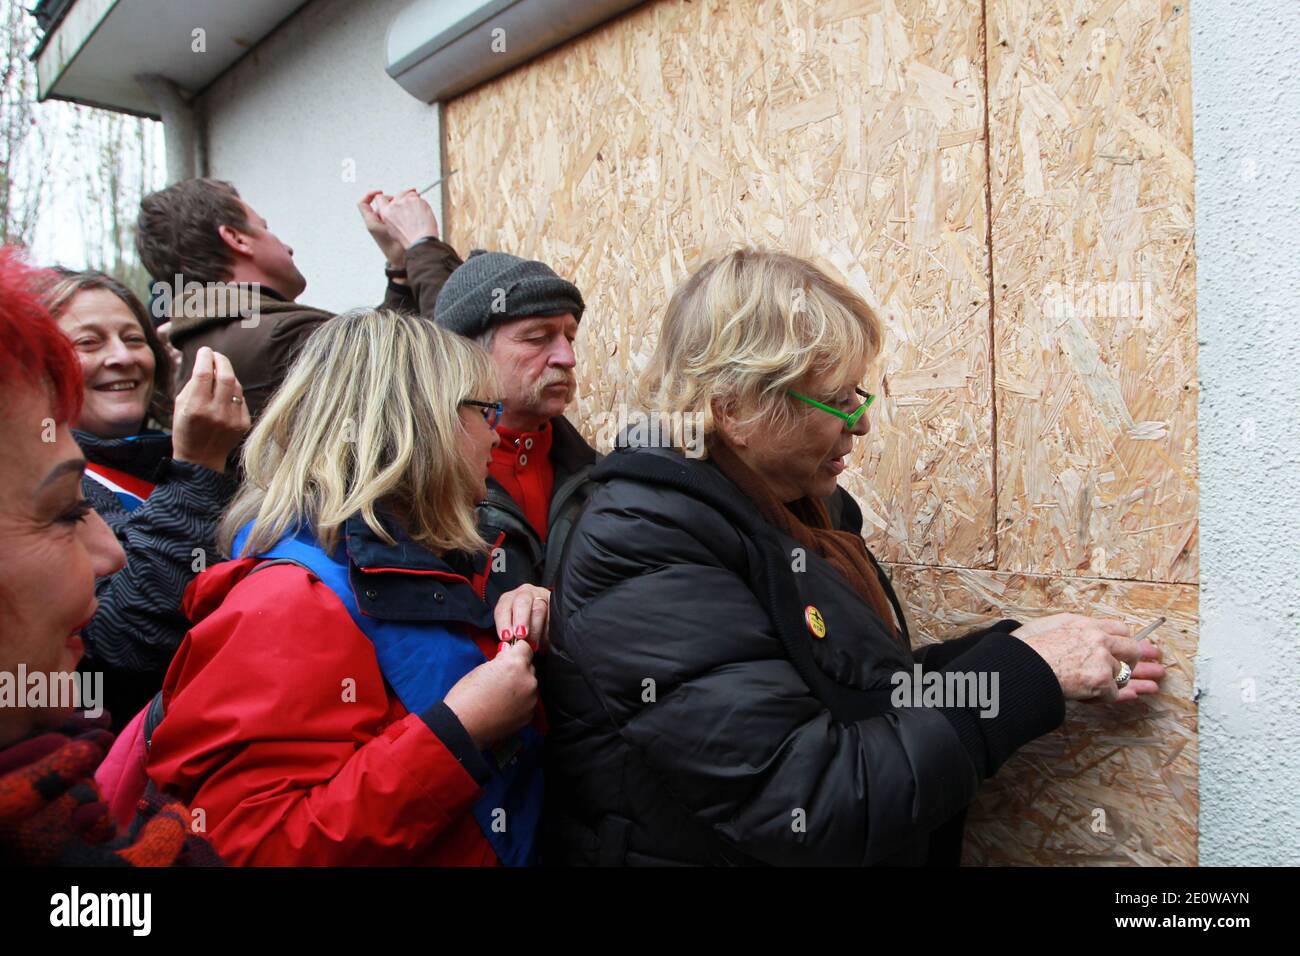 Europe Ecologie European Parliament Deputy Jose Bove and EELV member Eva Joly are about to remove a wooden plaque fence which was blocking a window of a house whose inhabitants have been expropriated for the Notre-Dame-des-Landes airport project, in the Grandchamp des Fontaines district, near Nantes, western France on November 16, 2012. The house owners as many others in the area have been expropriated and their house is to be demolished by Vinci Group in charge of the new airport construction. Photo by Laetitia Notarianni/ABACAPRESS.COM Stock Photo